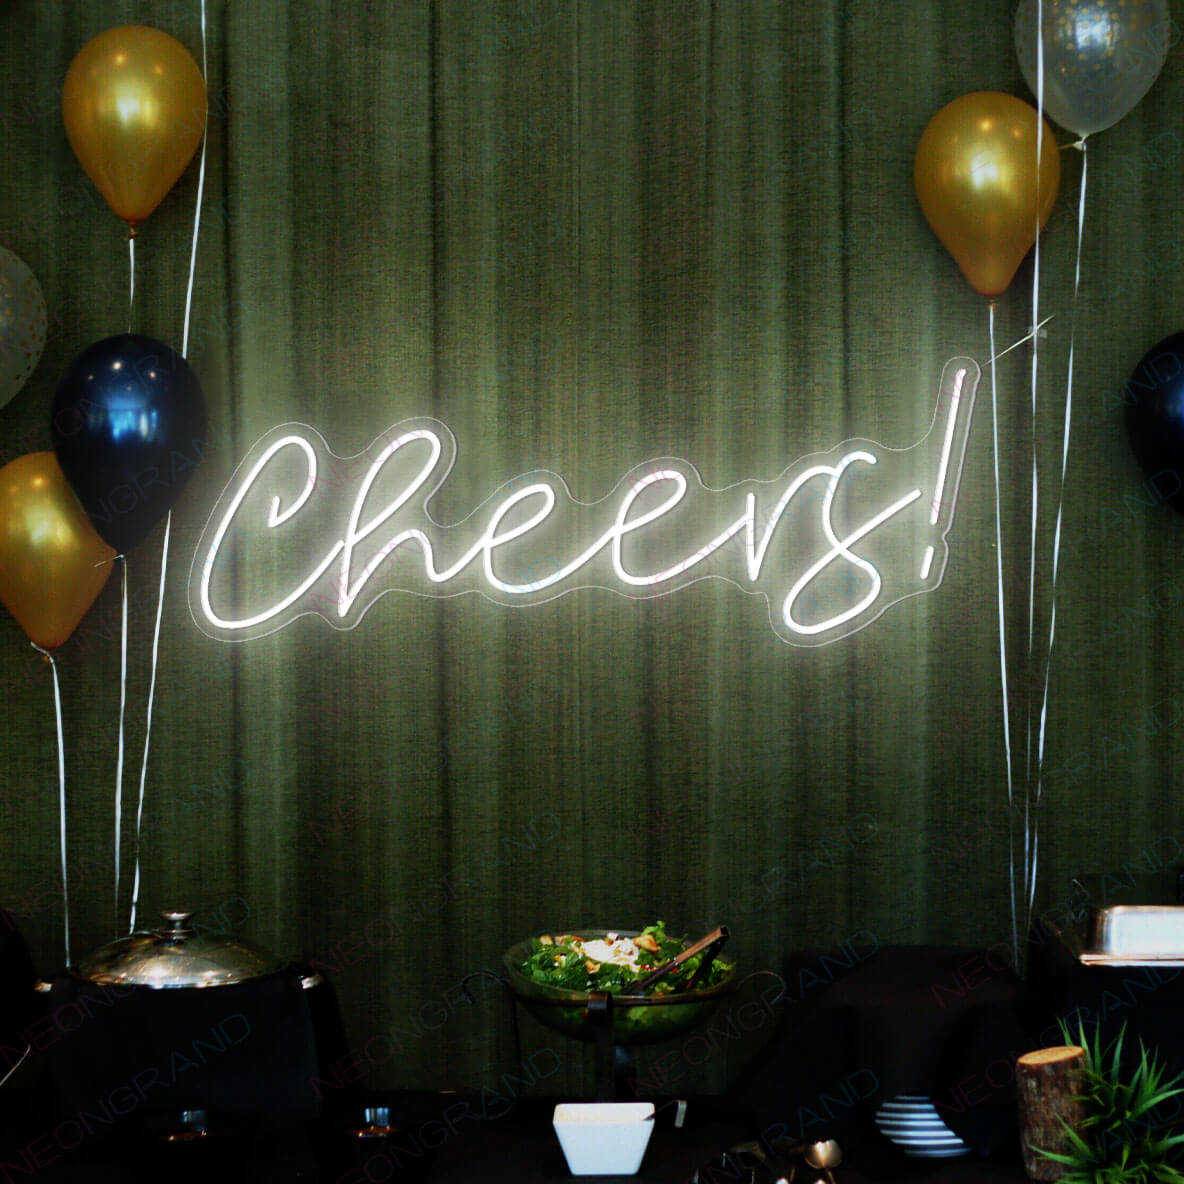 Affiche lumineuse LED "Cheers" pour bar